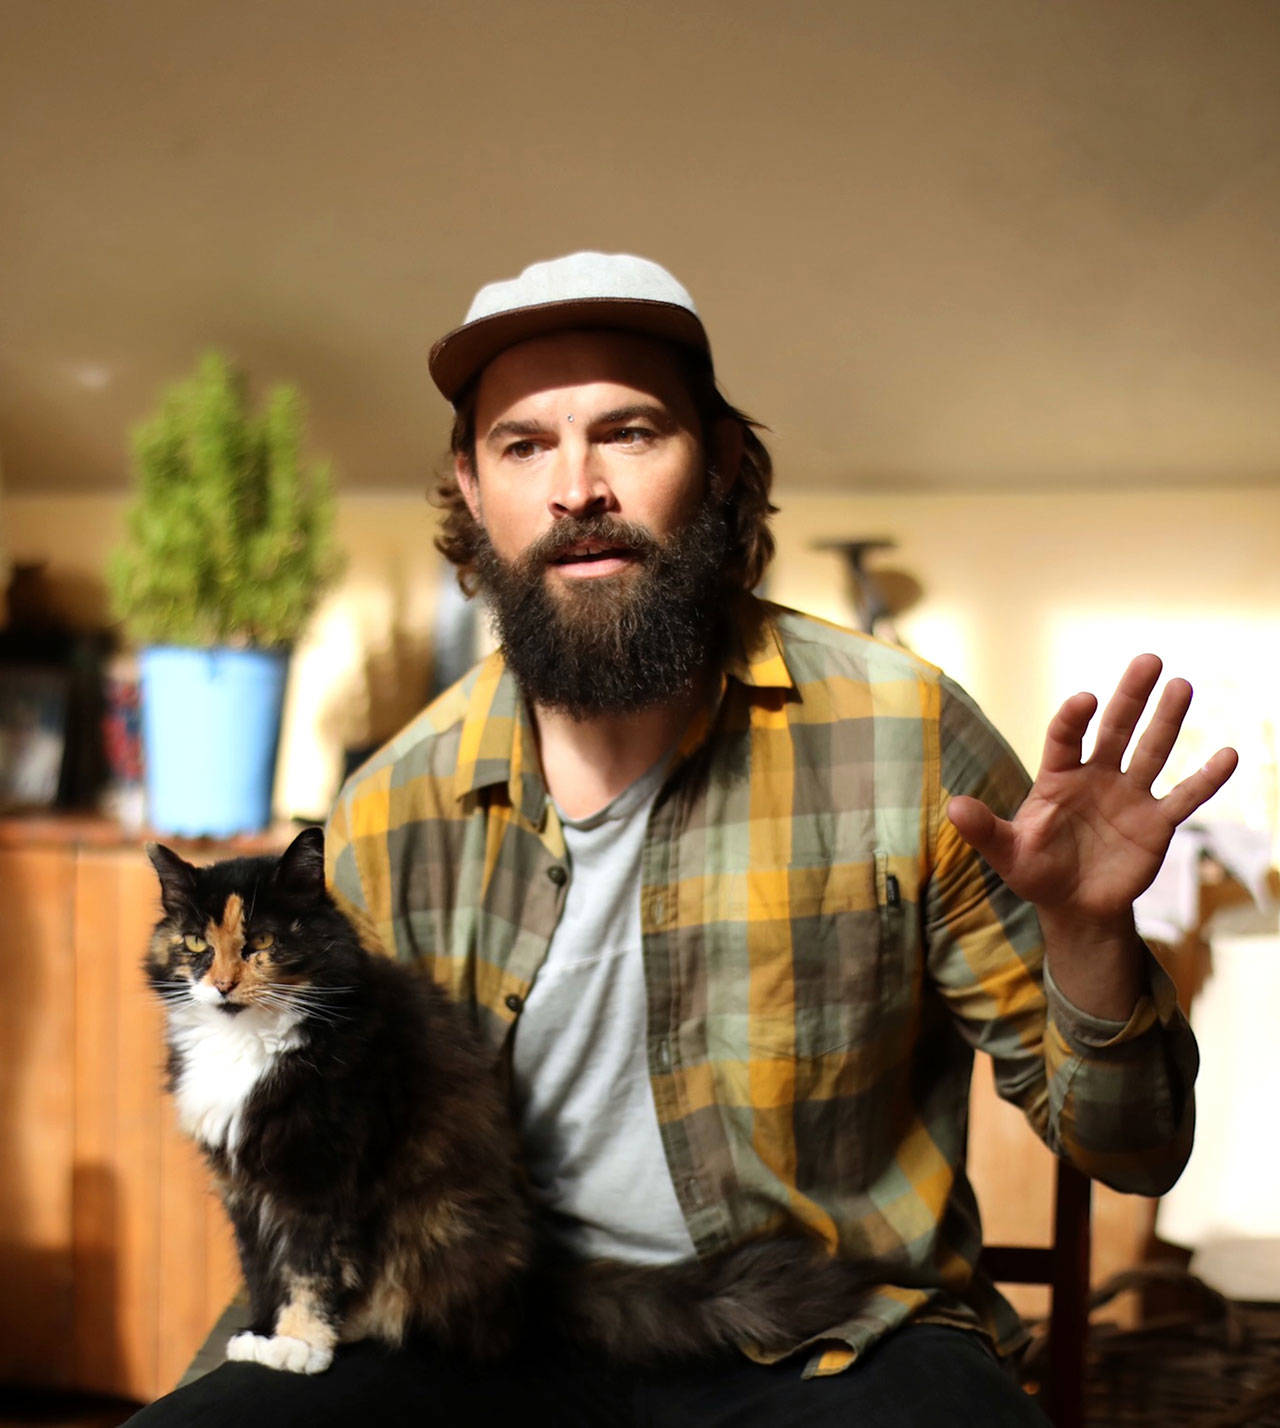 Actor Dillon Porter rehearses for ‘Walt Whitman 200,’ his production starting Thursday at Port Townsend’s Chameleon Theater. Spice the cat provided criticism. (Dillon Porter)